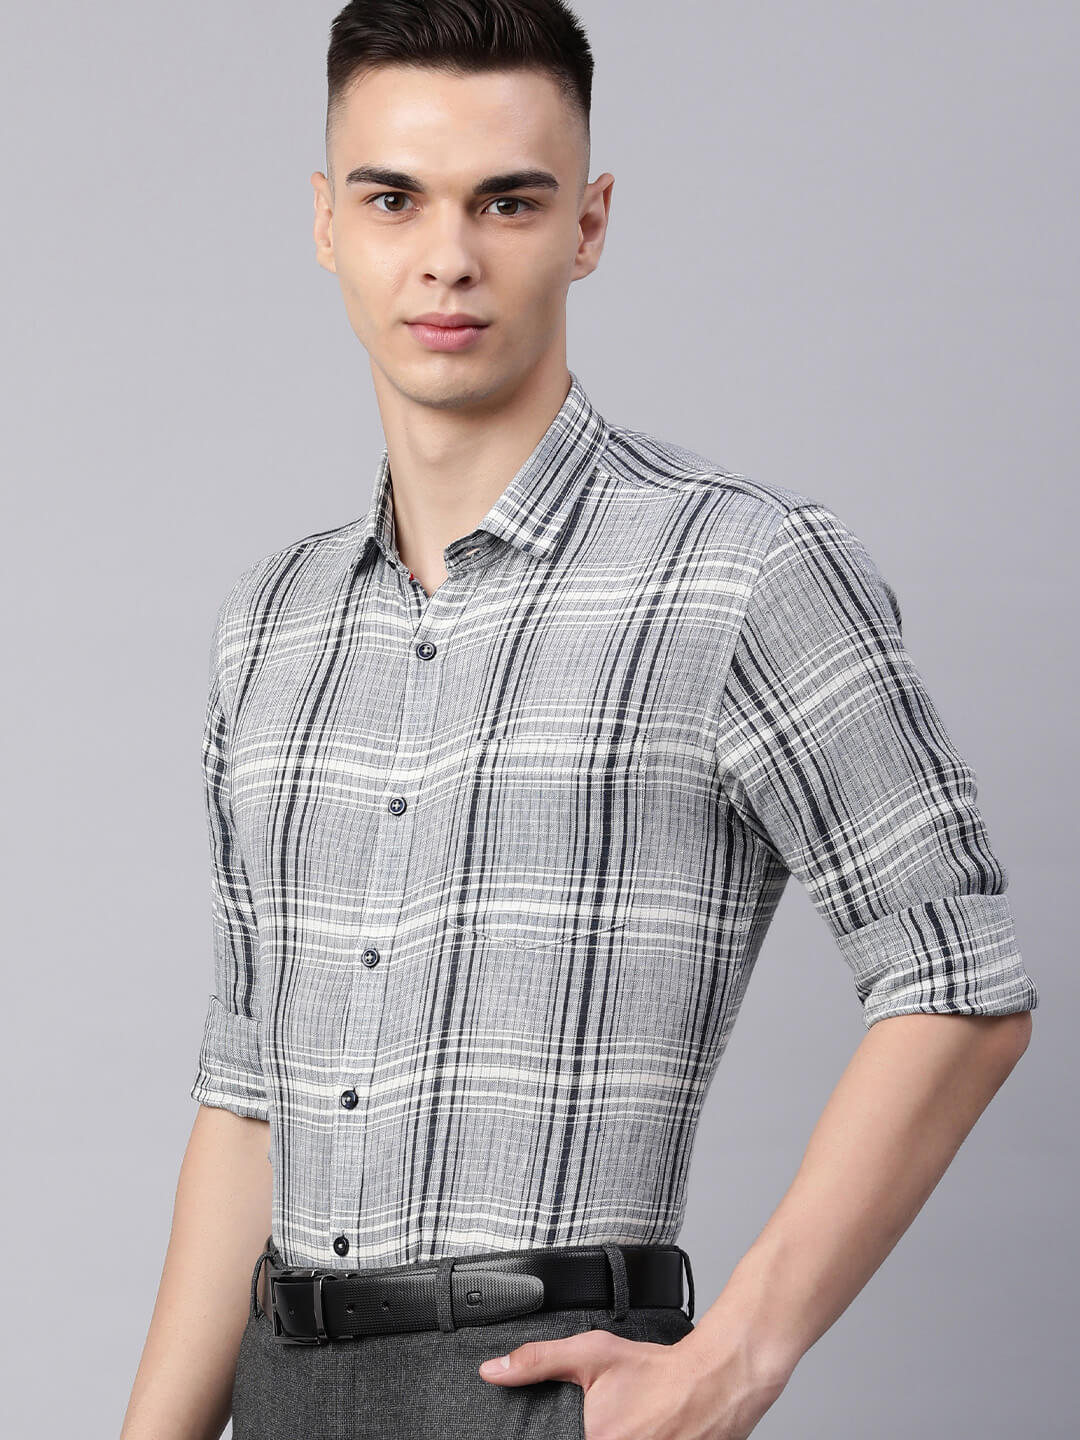 5thanfold Men's Casual Pure Cotton Full Sleeve Checkered Grey Slim Fit Shirt